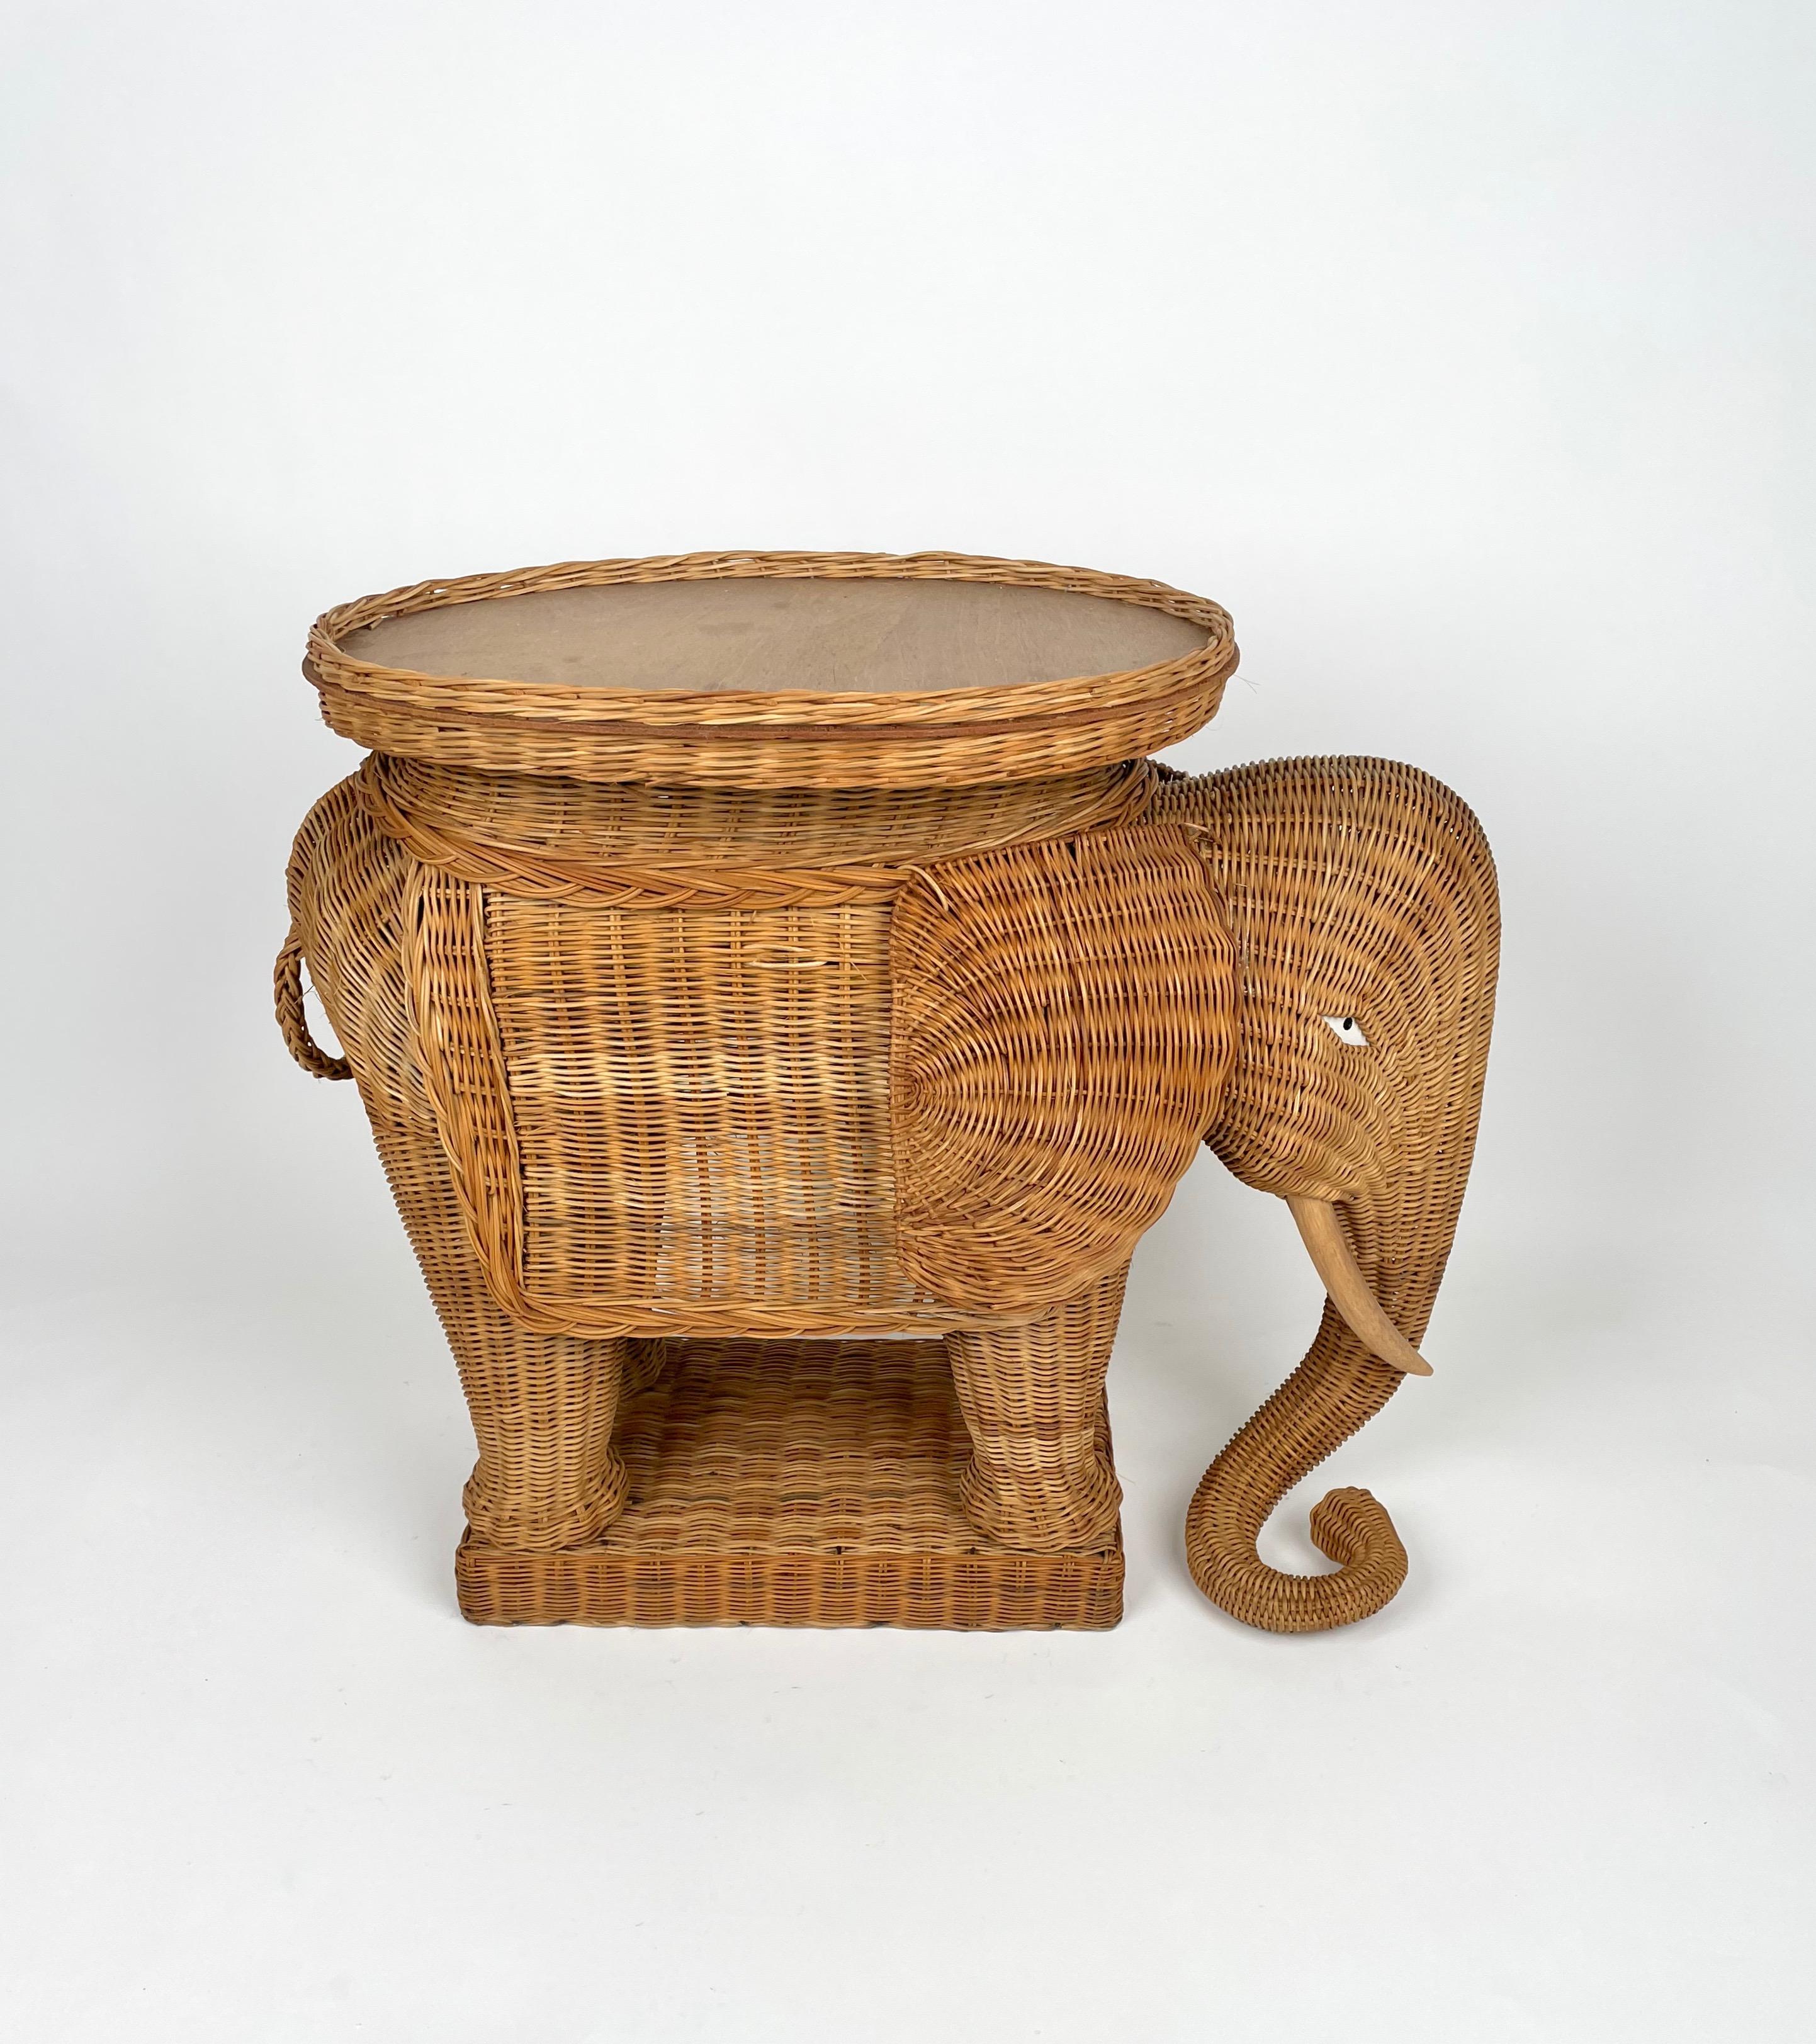 Elephant-shaped end coffee table in hand-braided rattan accented with wood tusks.

Made in France, 1960s.